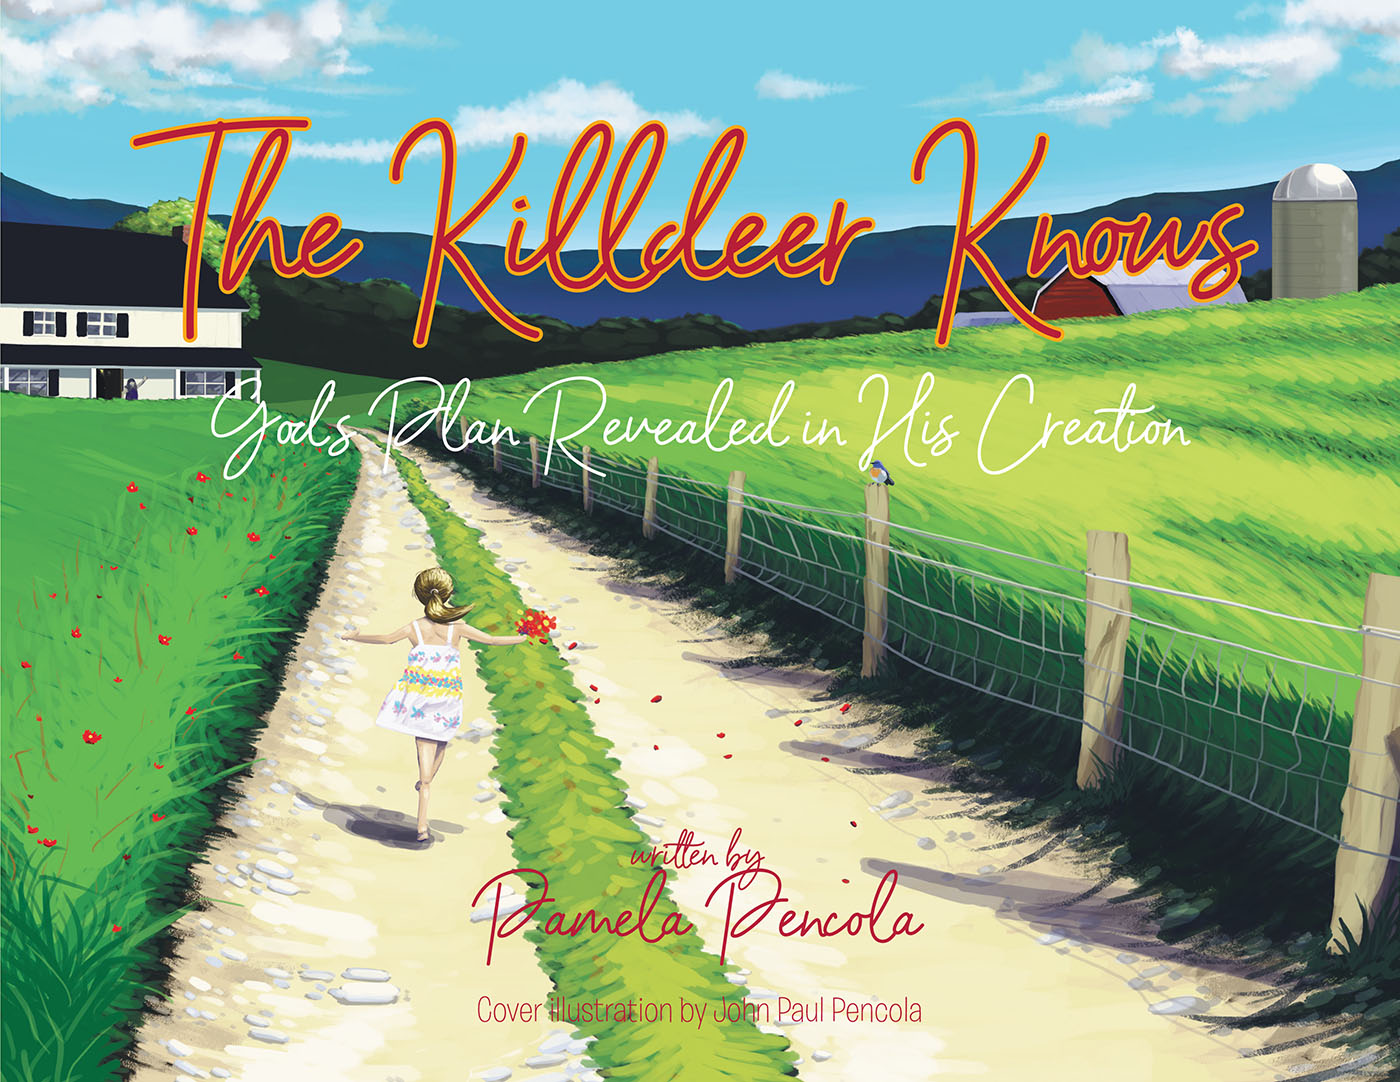 Pamela Pencola’s Newly Released "The Killdeer Knows: God’s Plan Revealed in His Creation" is an Inspirational Tale of Divine Presence in the Ordinary